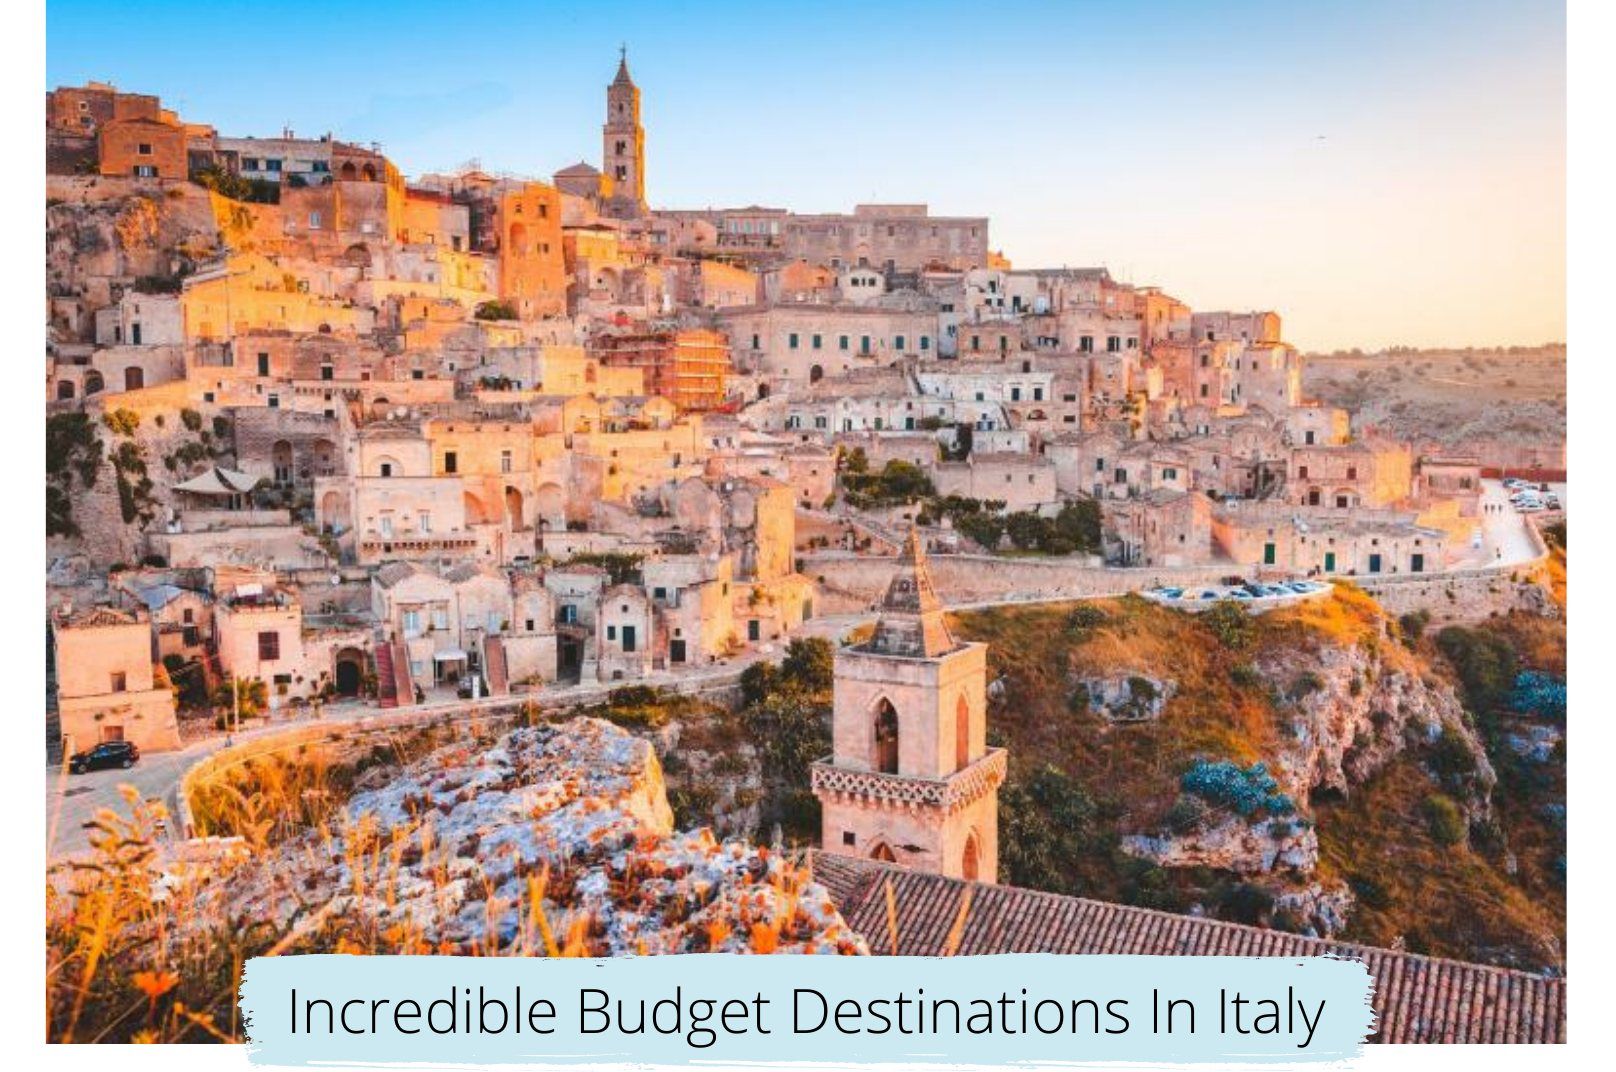 Plan the ultimate Italy trip